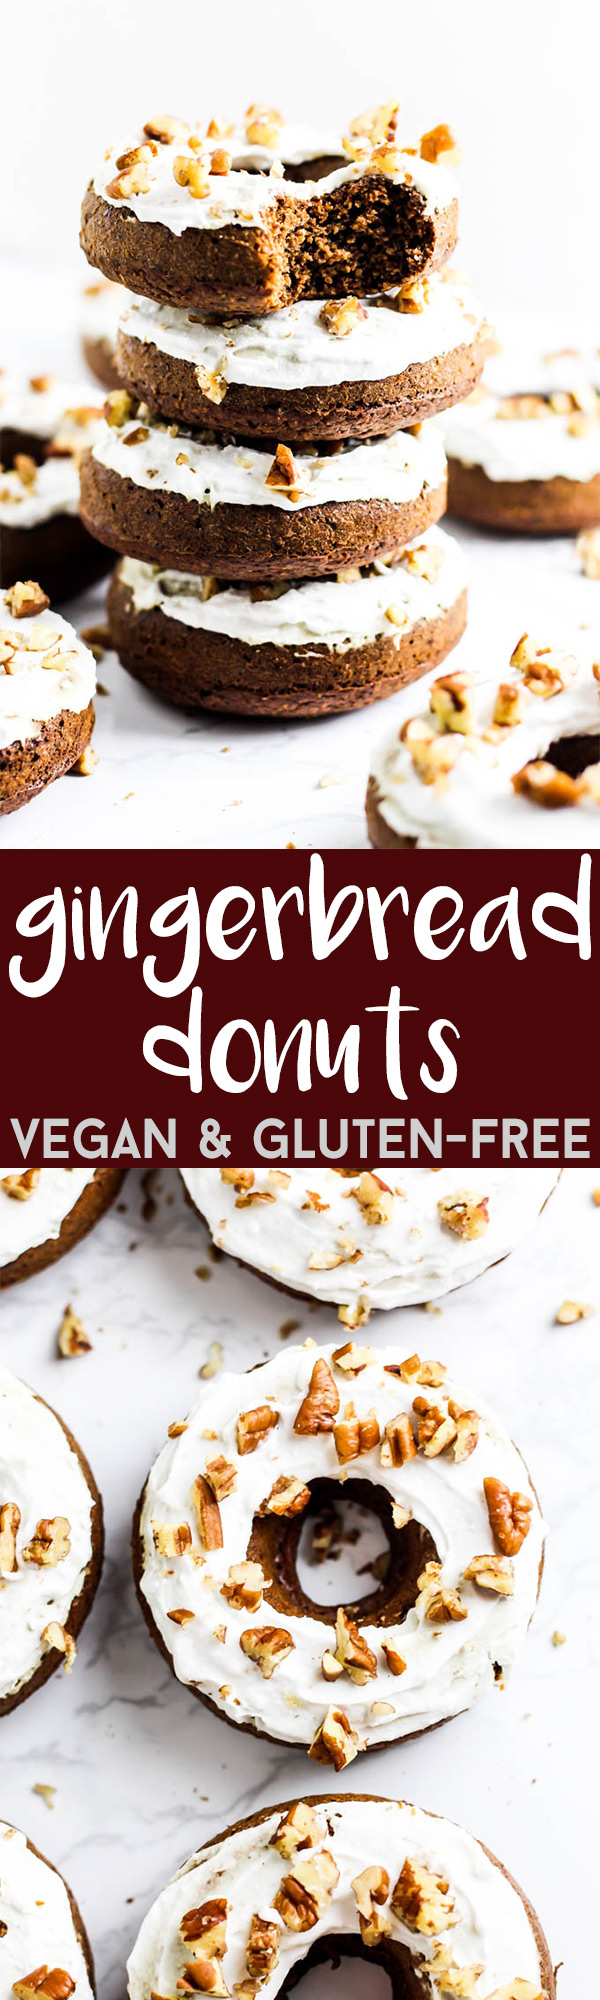 You won't believe these fluffy, delicious Gingerbread Donuts are vegan & gluten-free! They're the perfect dessert to make for the holidays. Or any day!